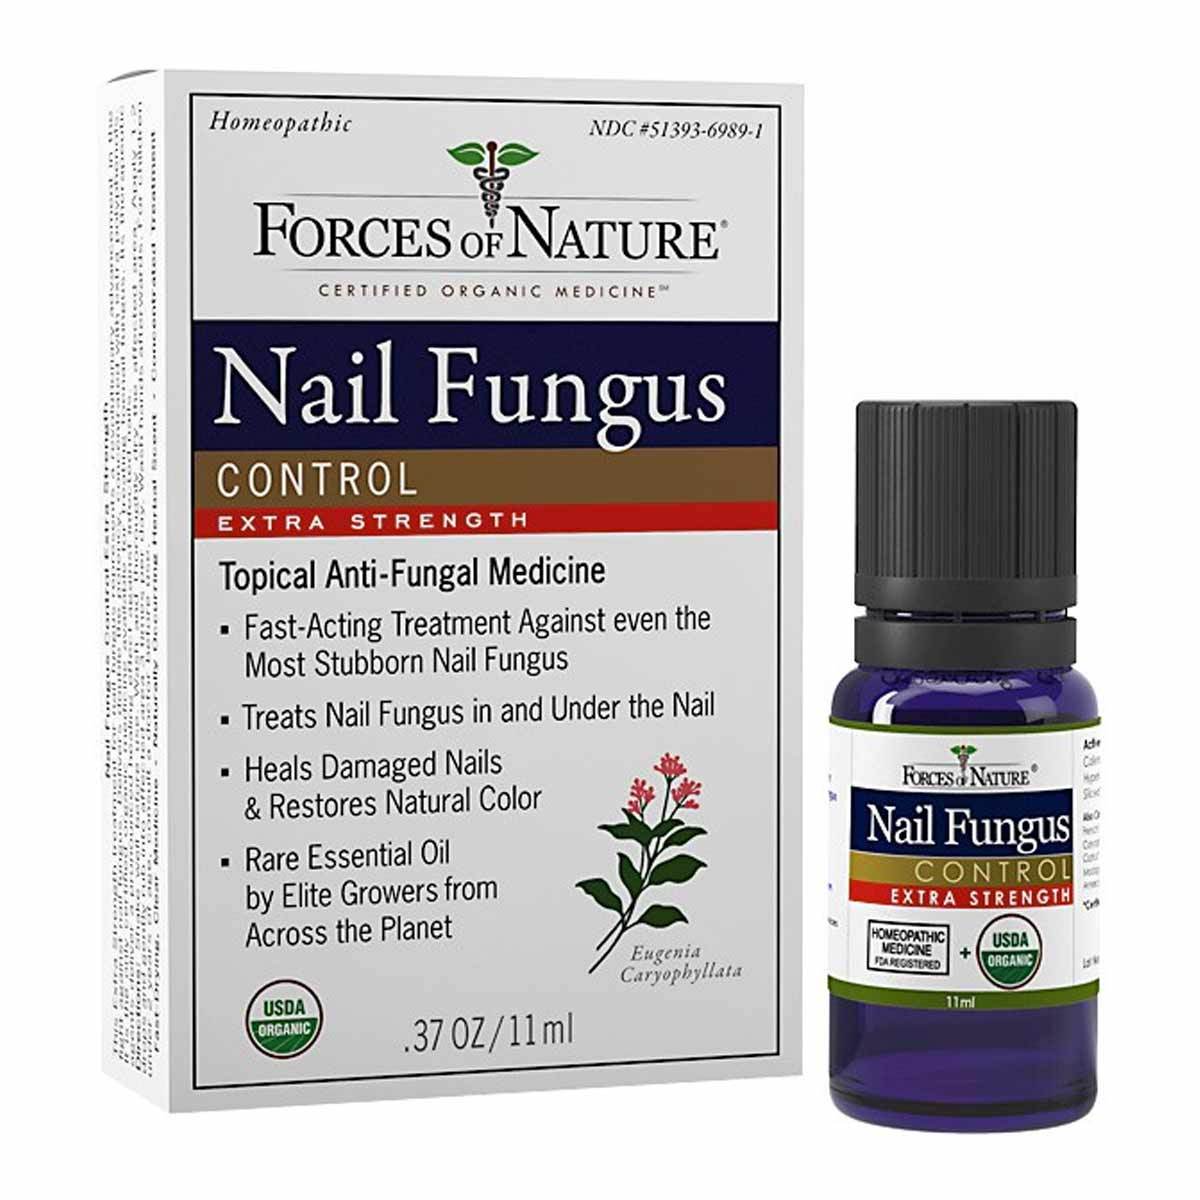 Primary image of Nail Fungus Control Extra Strength